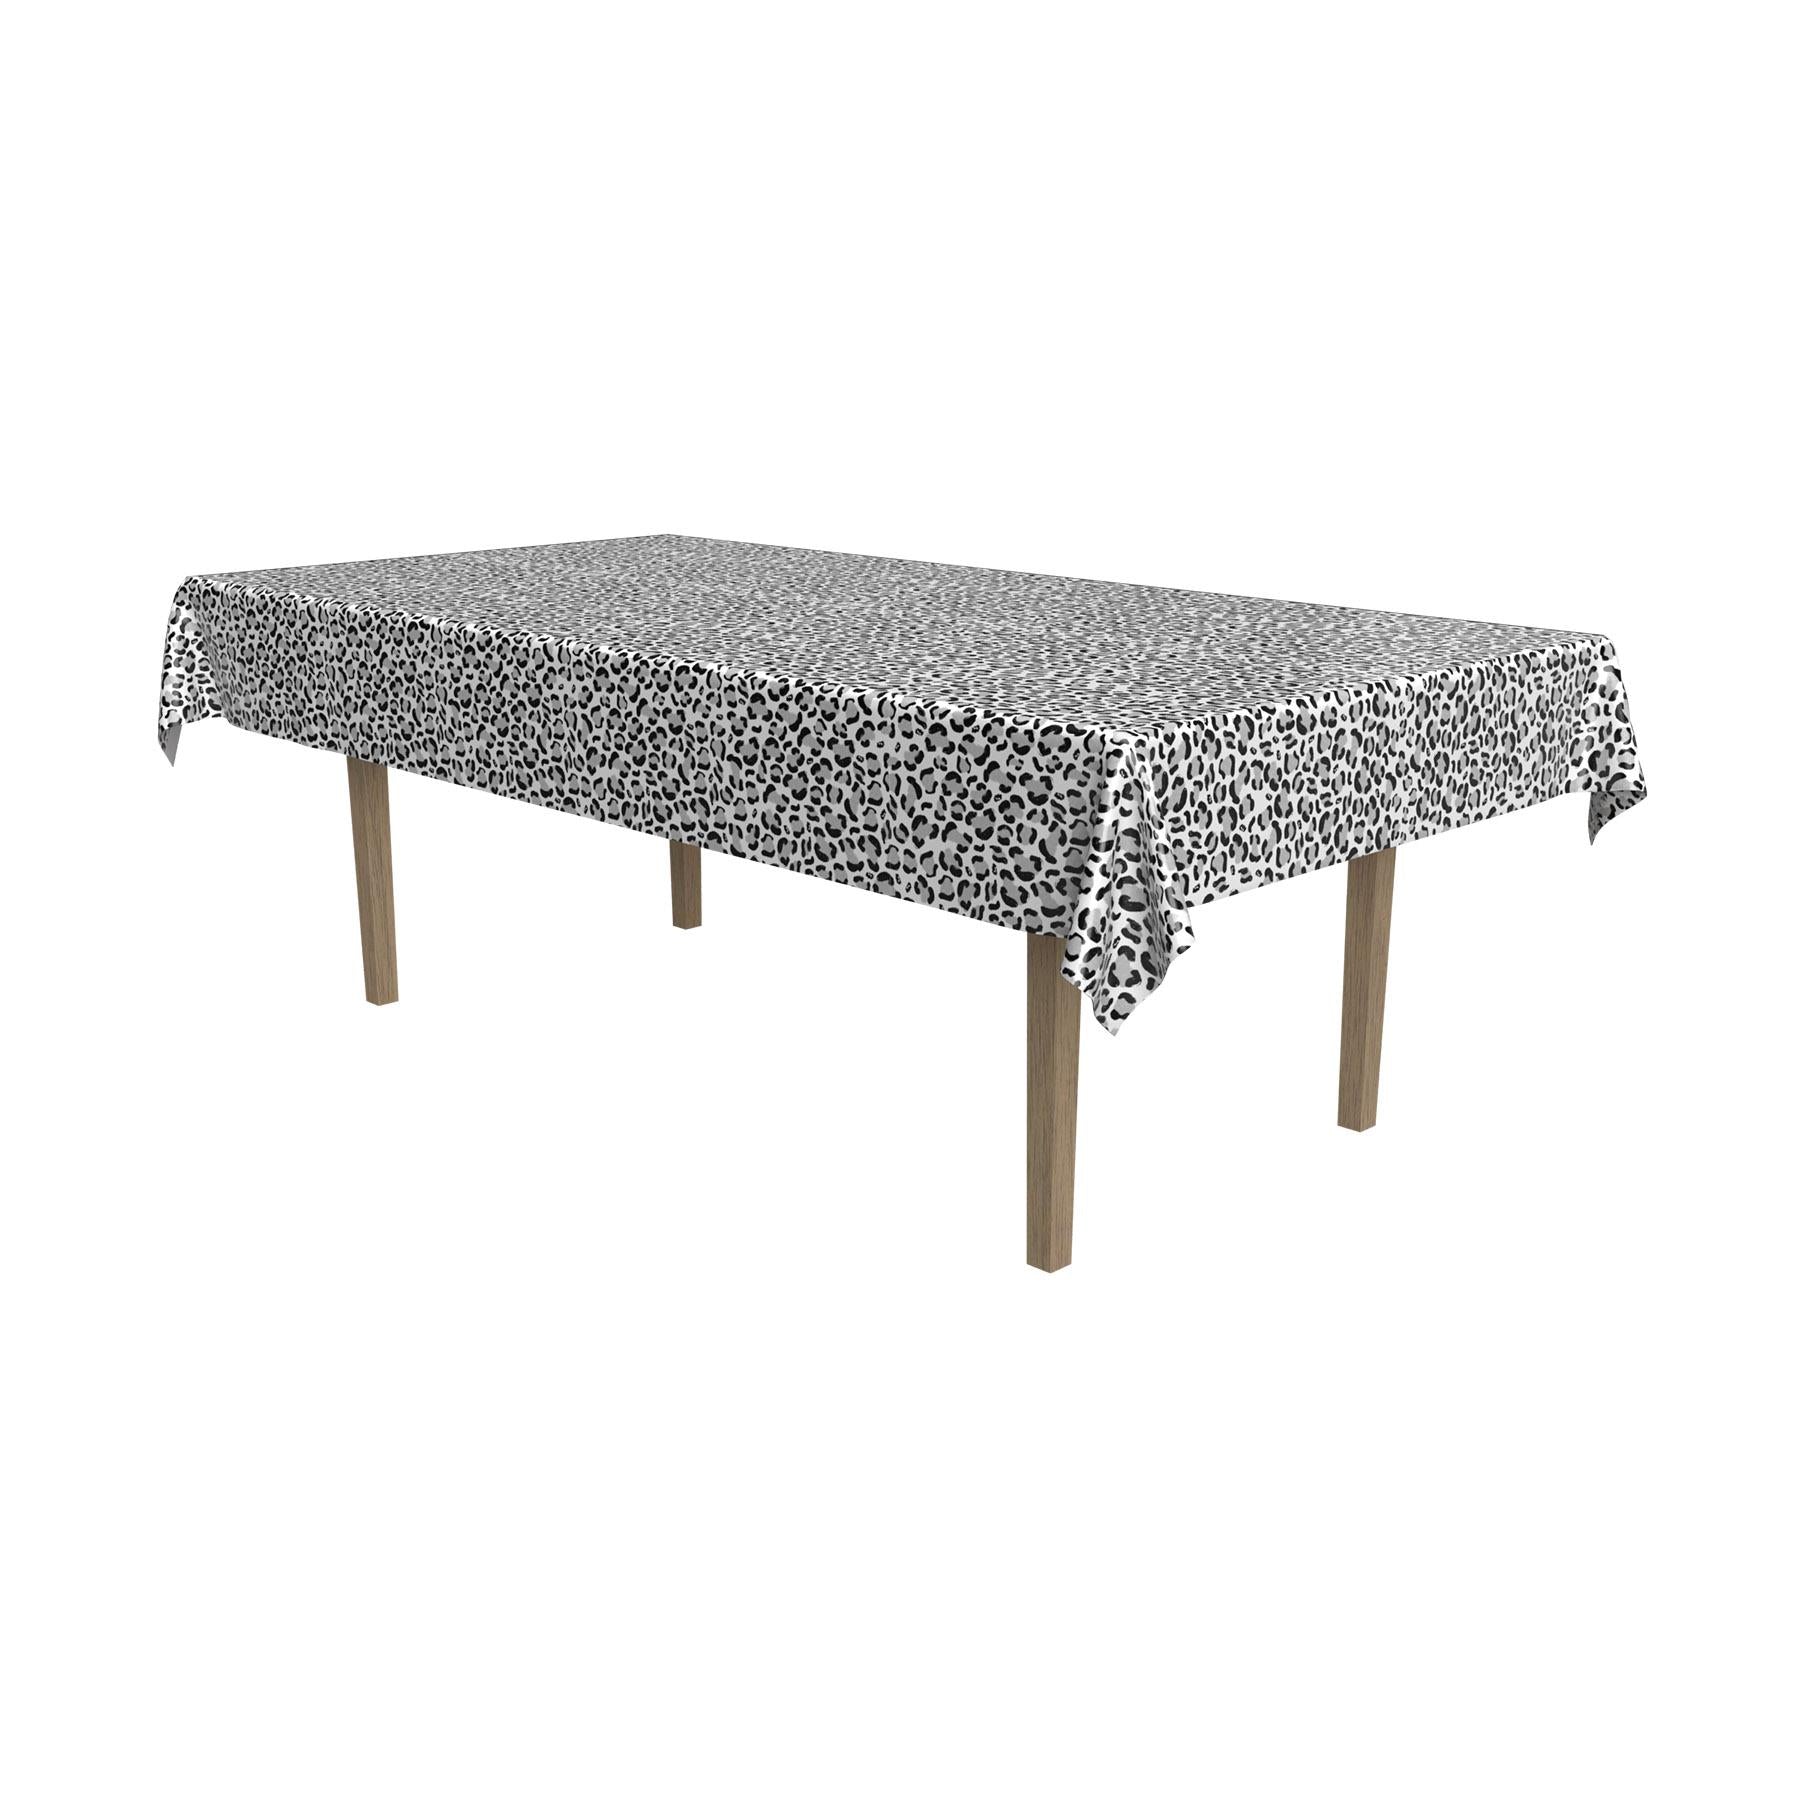 Snow Leopard Print Party Tablecover (12 per Case)